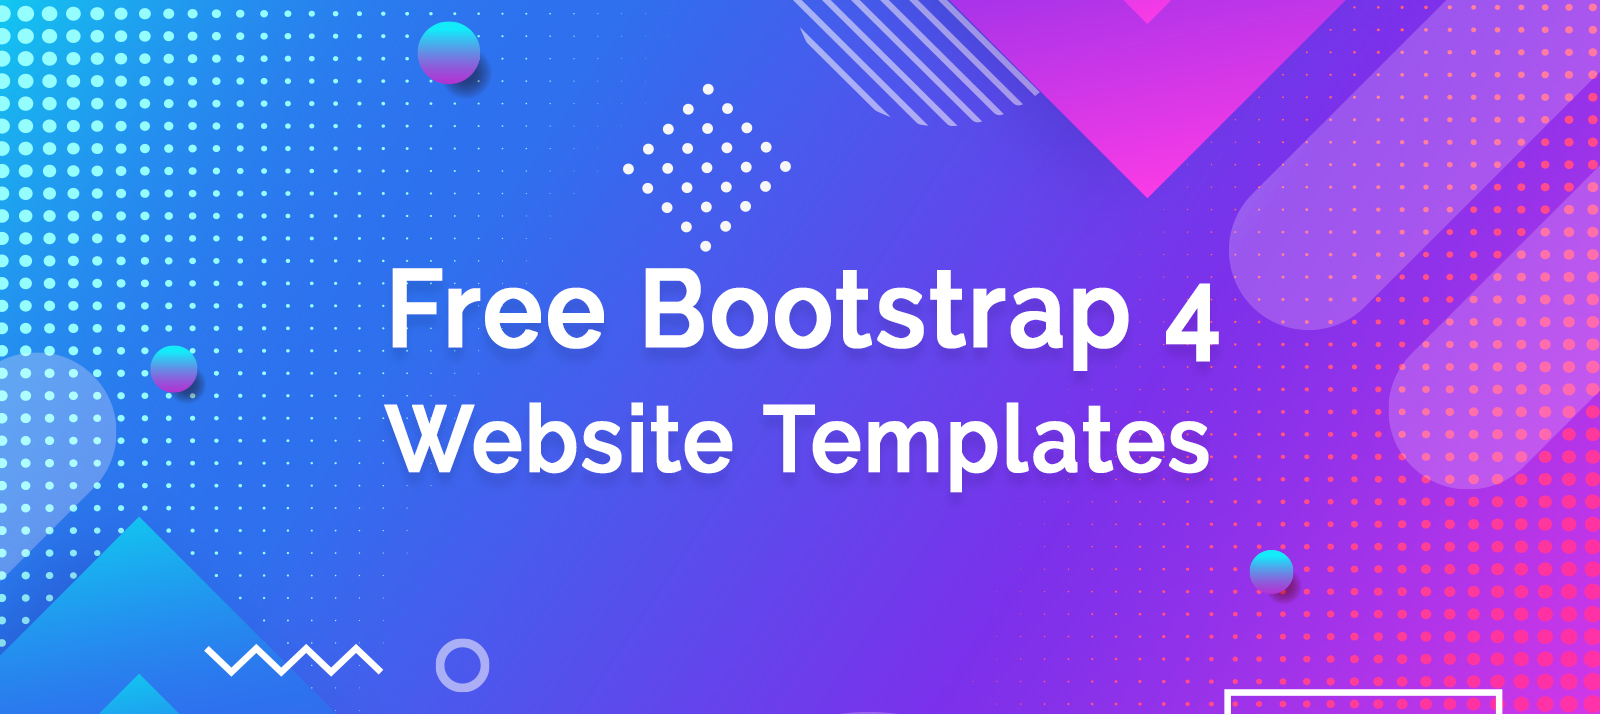  25+ Free Bootstrap 4 Website Templates You Do Not want To Miss Out in 2020